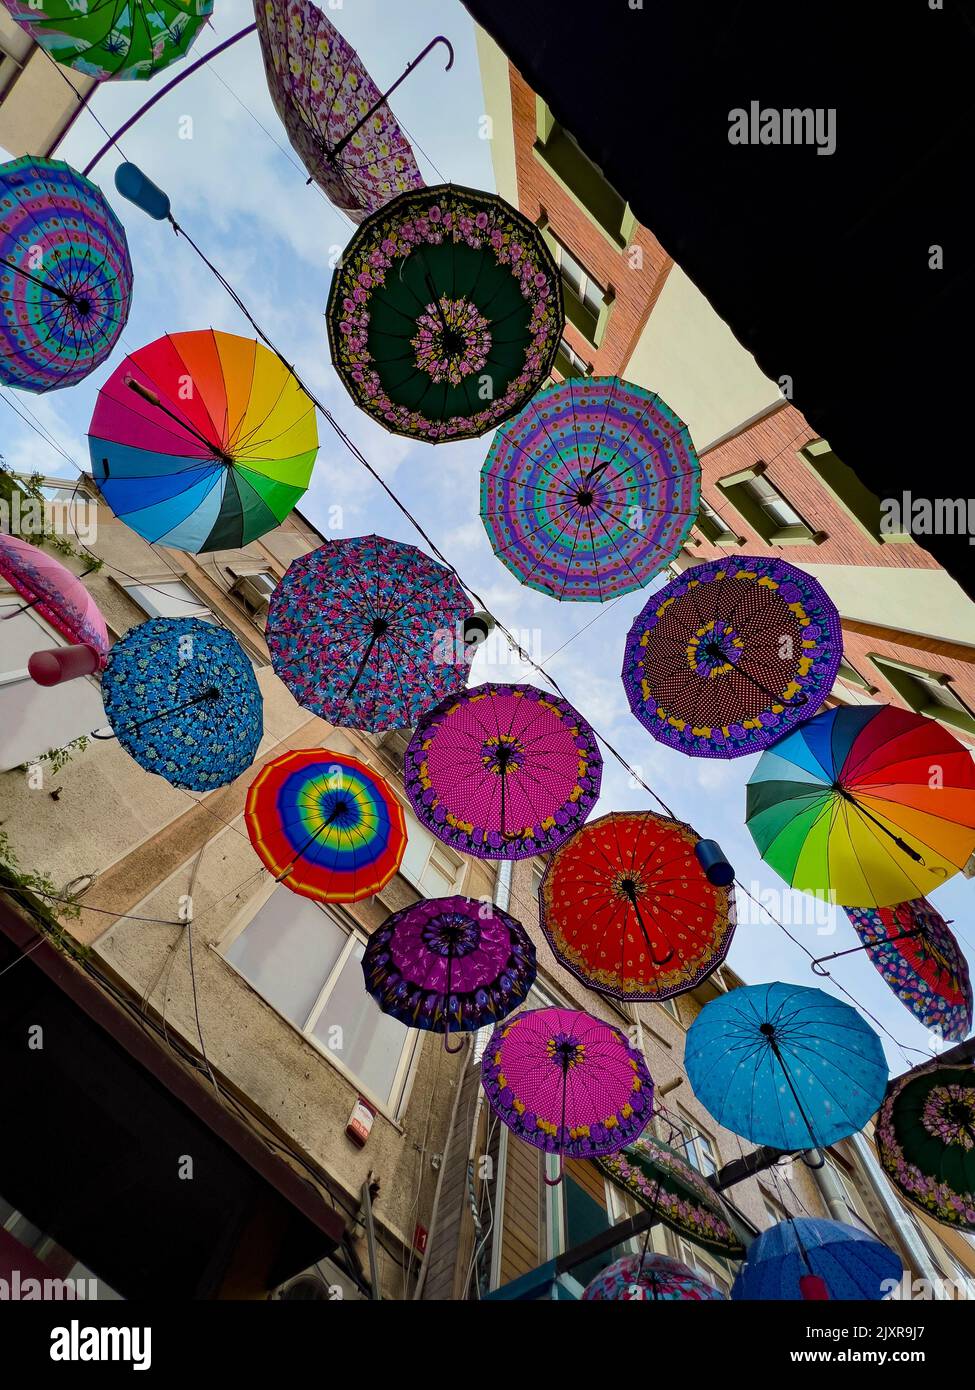 Colorful hanging umbrellas in various designs and shapes hanging between residential apartments in a district in Istanbul, Turkey, directly above. Stock Photo